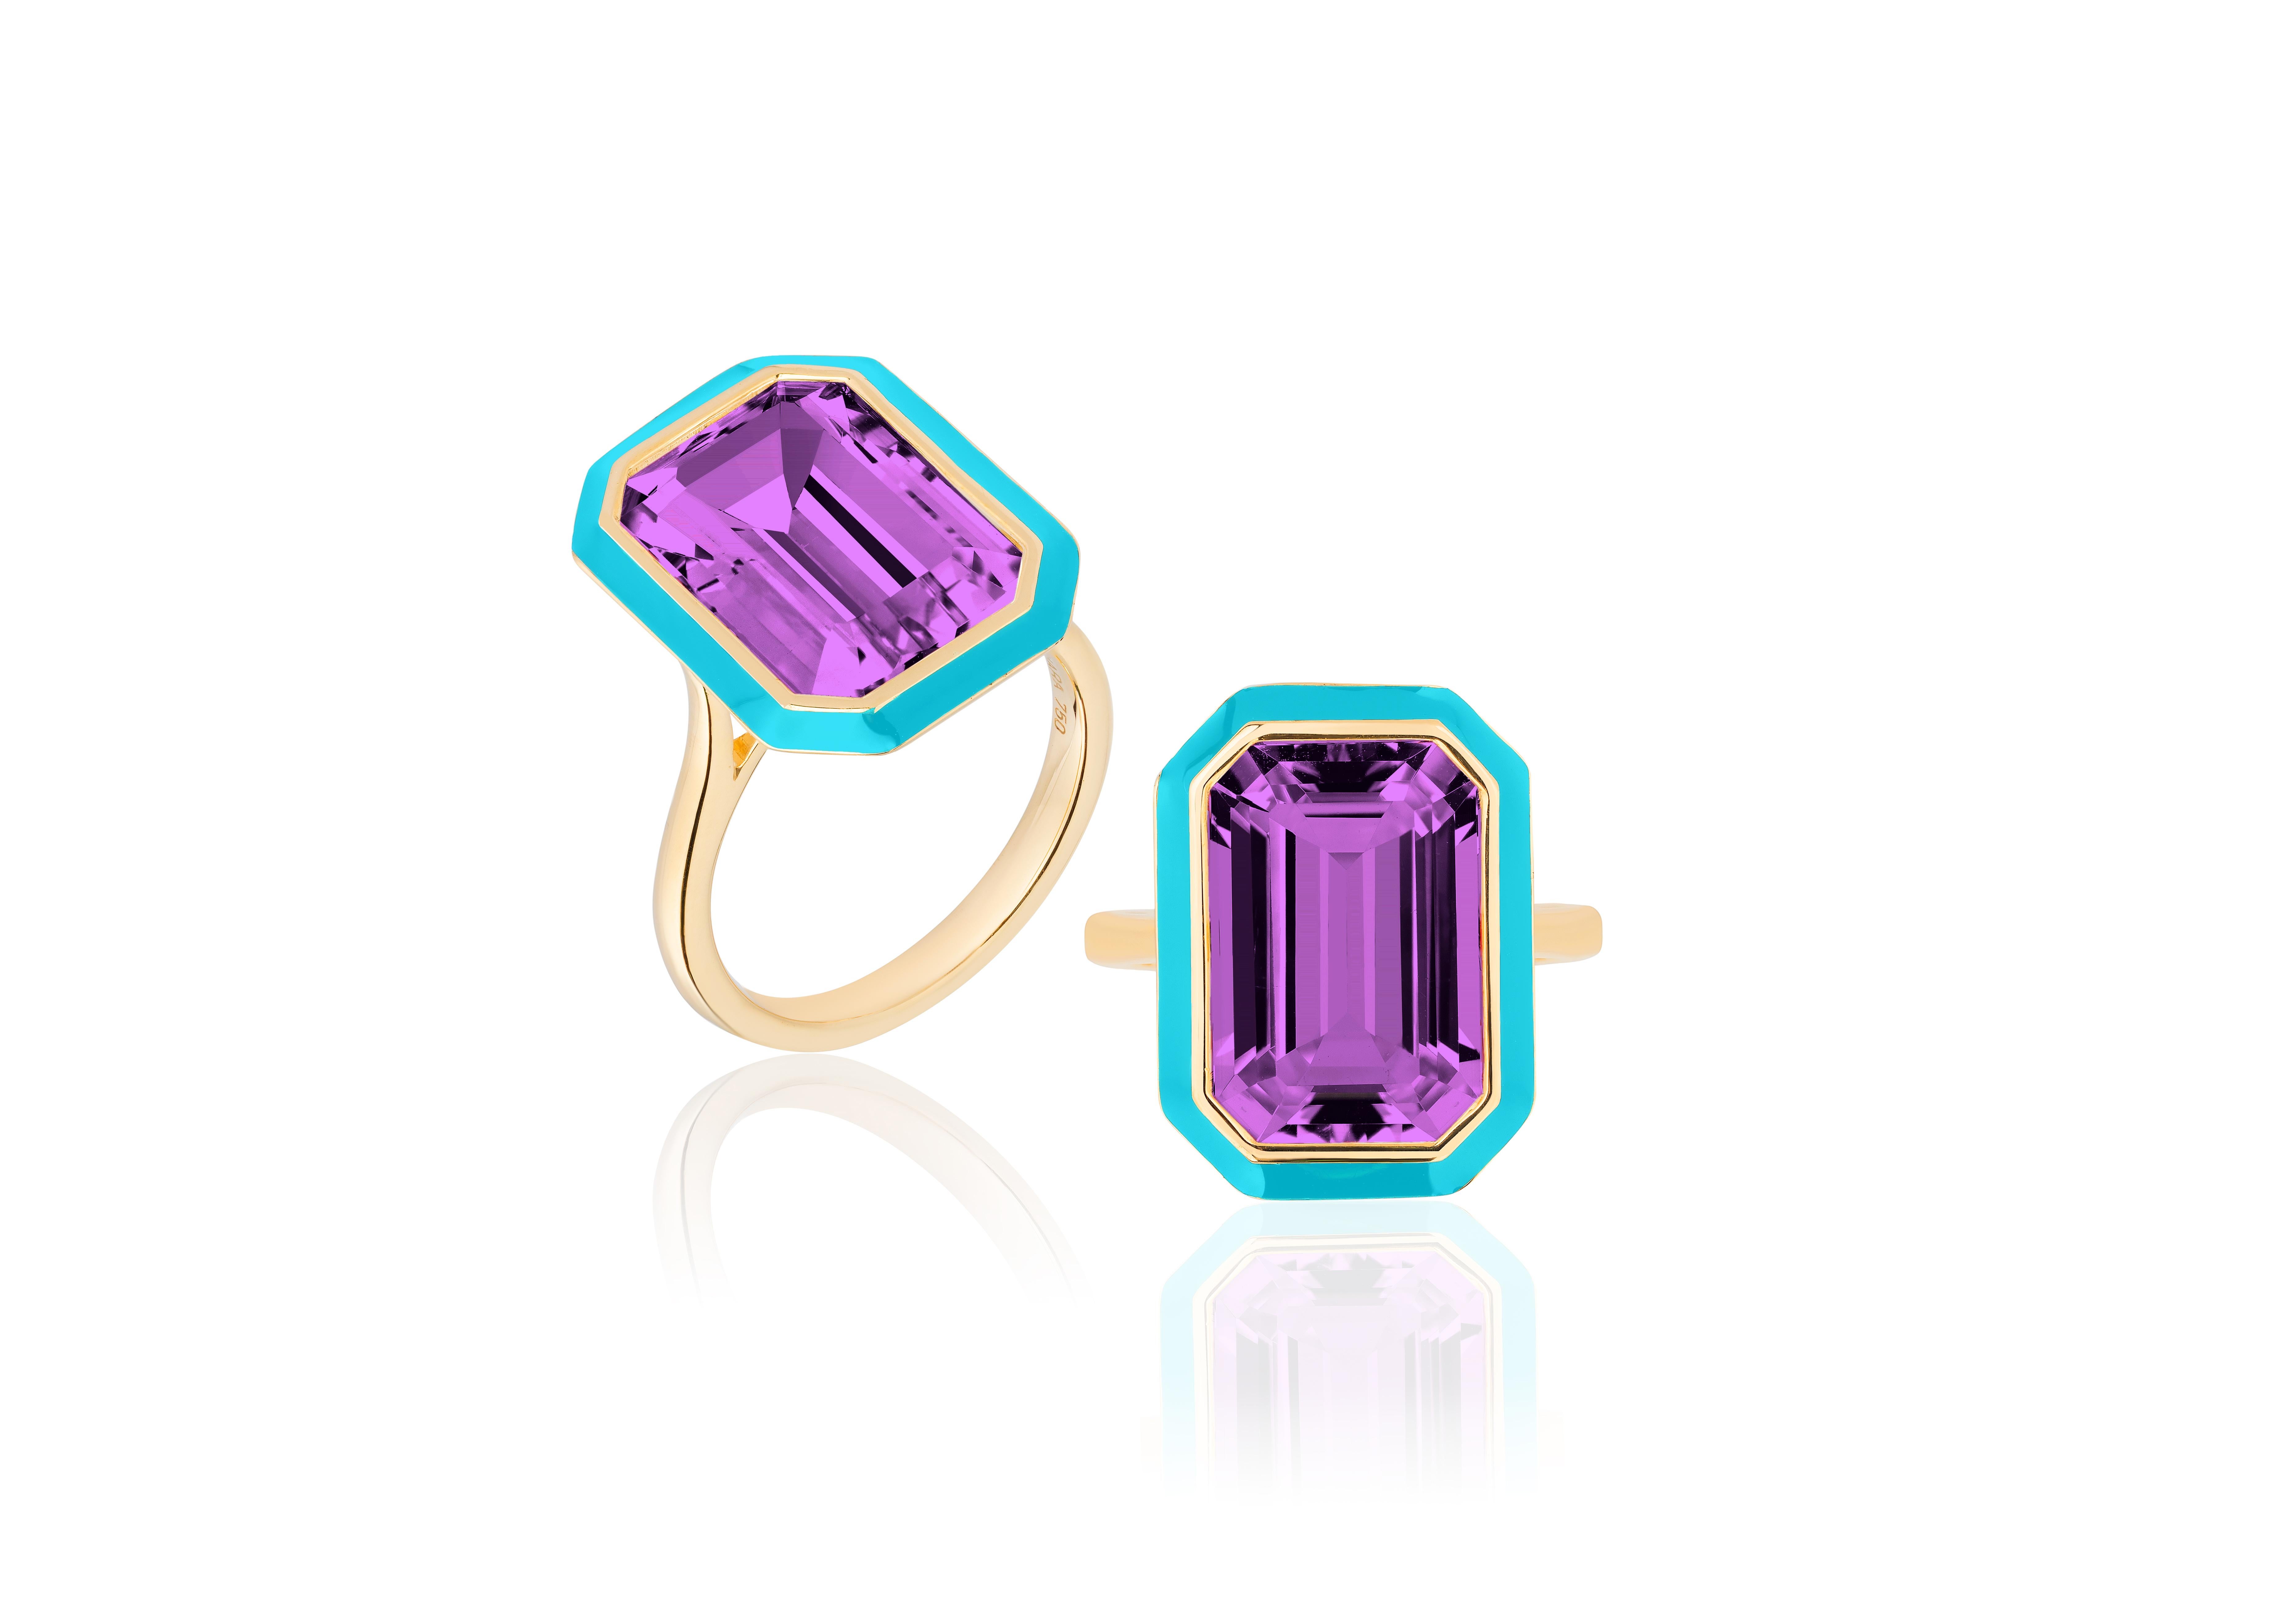 This set is a unique combination of Amethyst and Turquoise enamel. If you want to make a statement this is the perfect set to do it!

The set includes -

A 10 x 15 mm Amethyst Emerald cut ring in a bezel setting, with Turquoise enamel in the